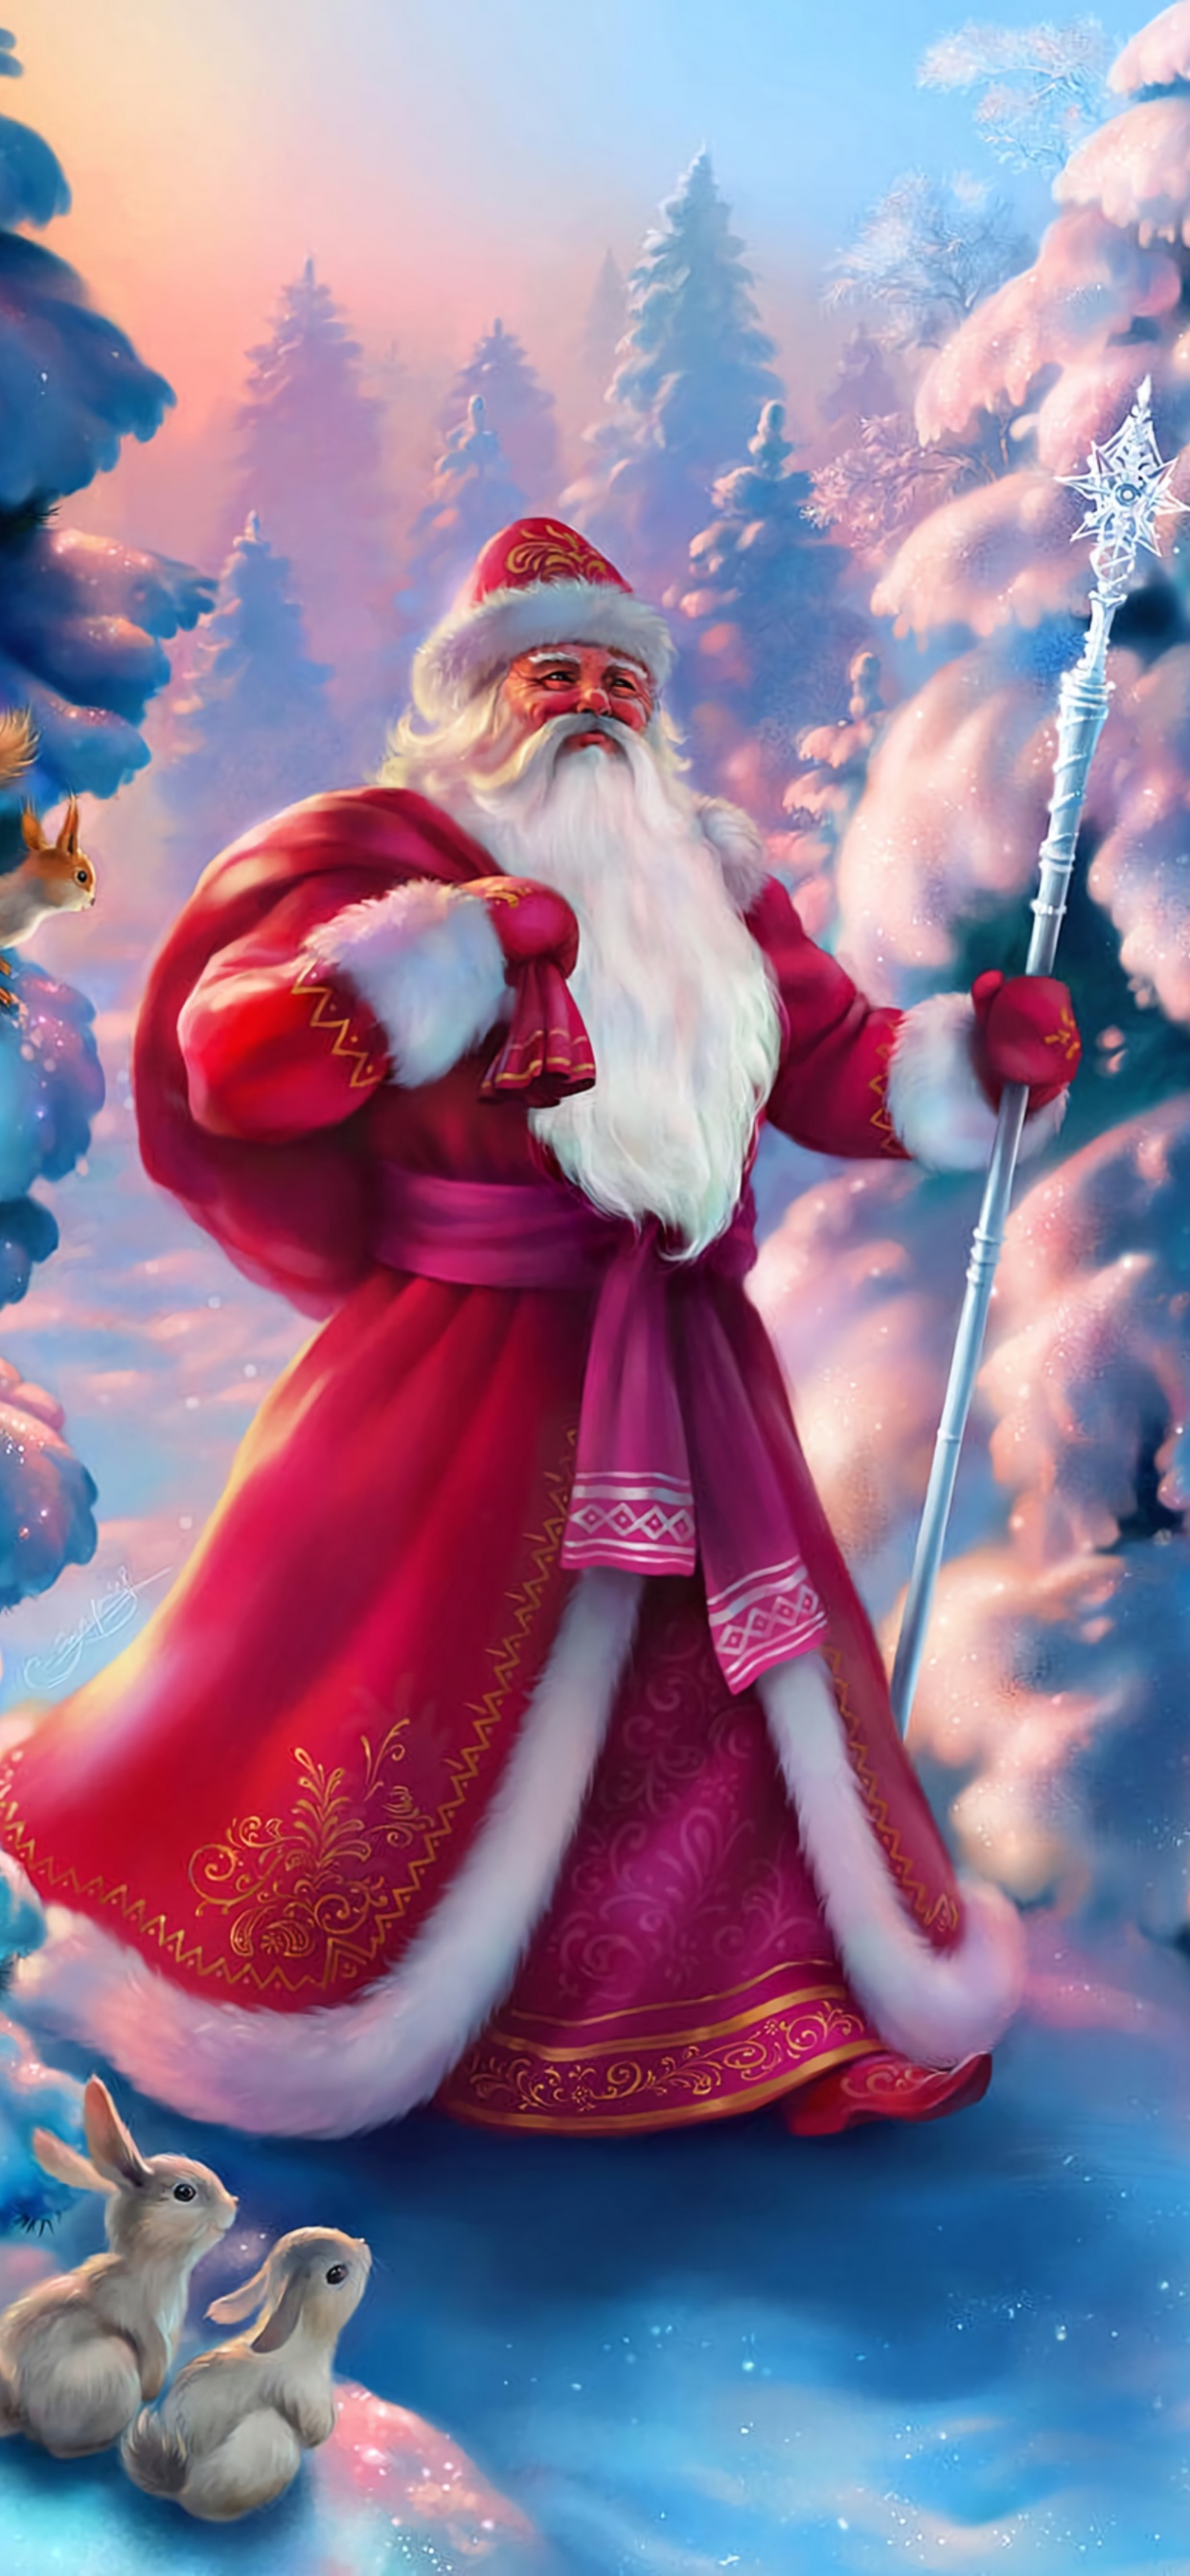 Santa Claus, Ded Moroz, Christmas Day, Christmas, Animation. Wallpaper in 1242x2688 Resolution